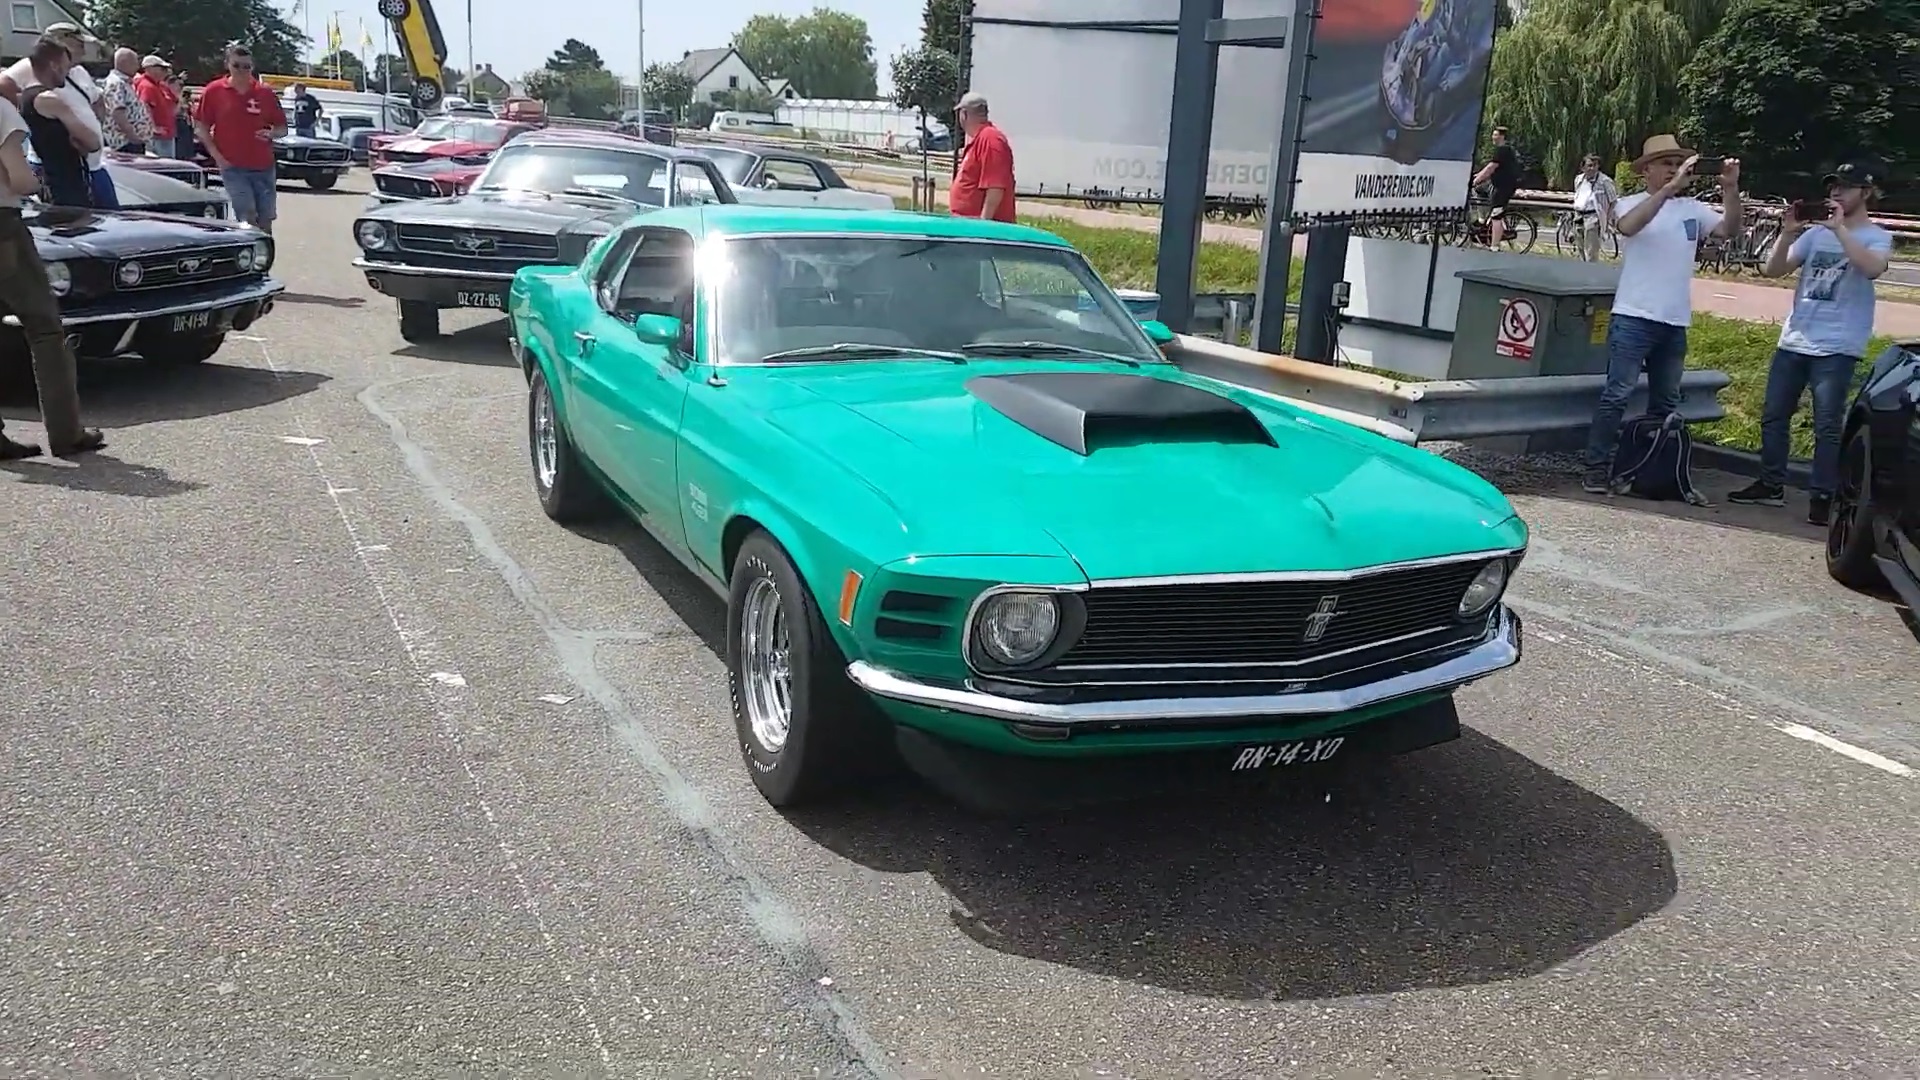 Video: 1970 Ford Mustang Boss 429 Showing Off At A Car Show